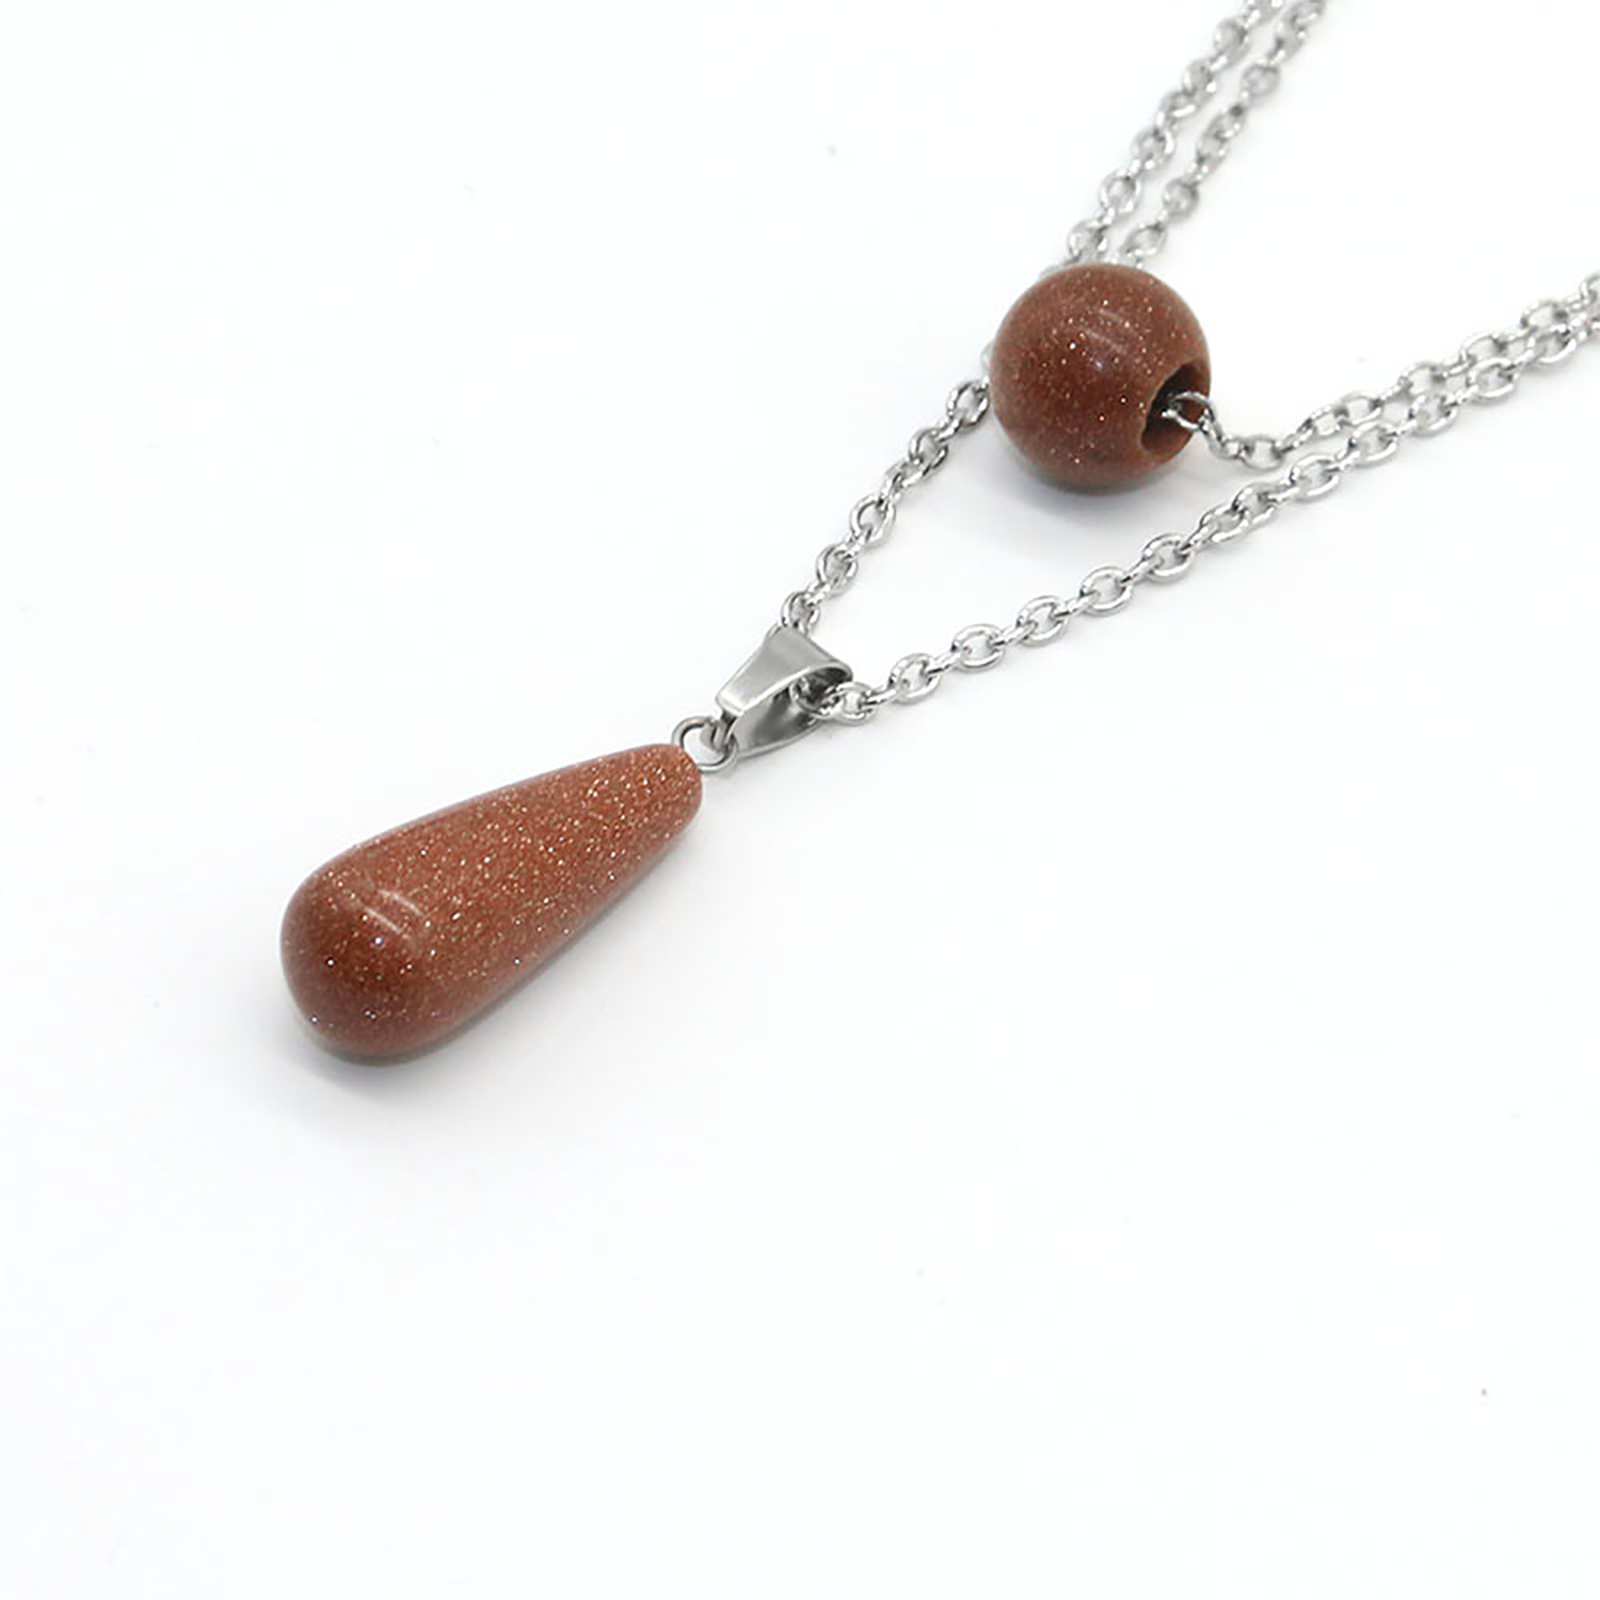 The pendant is about 10mm long, about 20mm high, and the double-layer necklace chain is about 50cm long